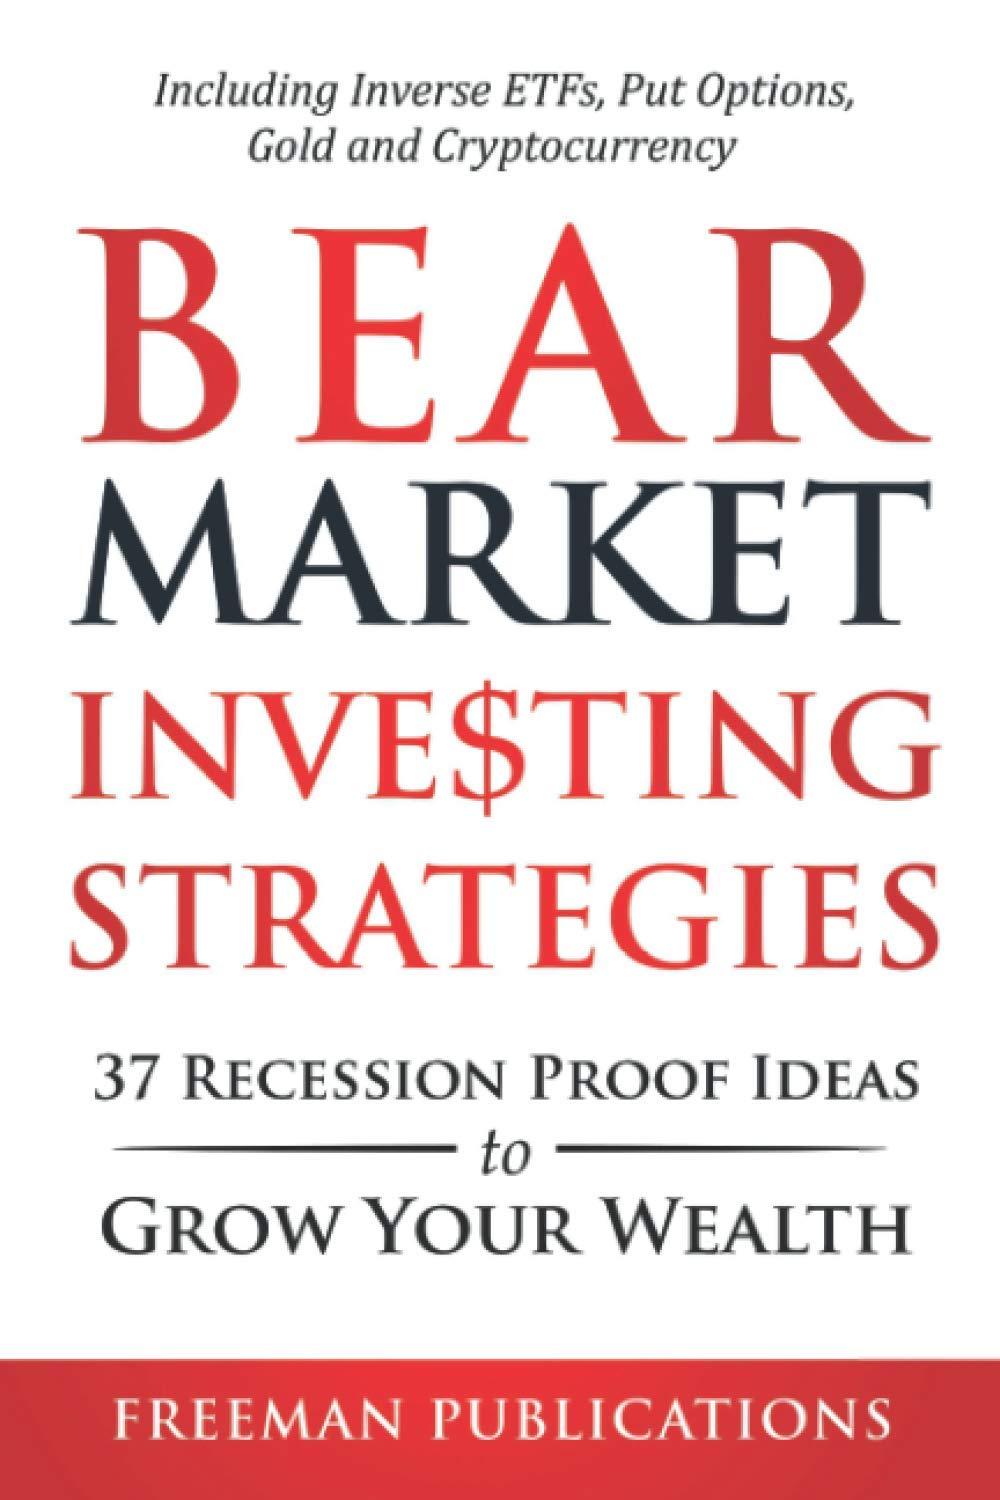 bear market investing strategies 37 recession proof ideas to grow your wealth including inverse etfs put